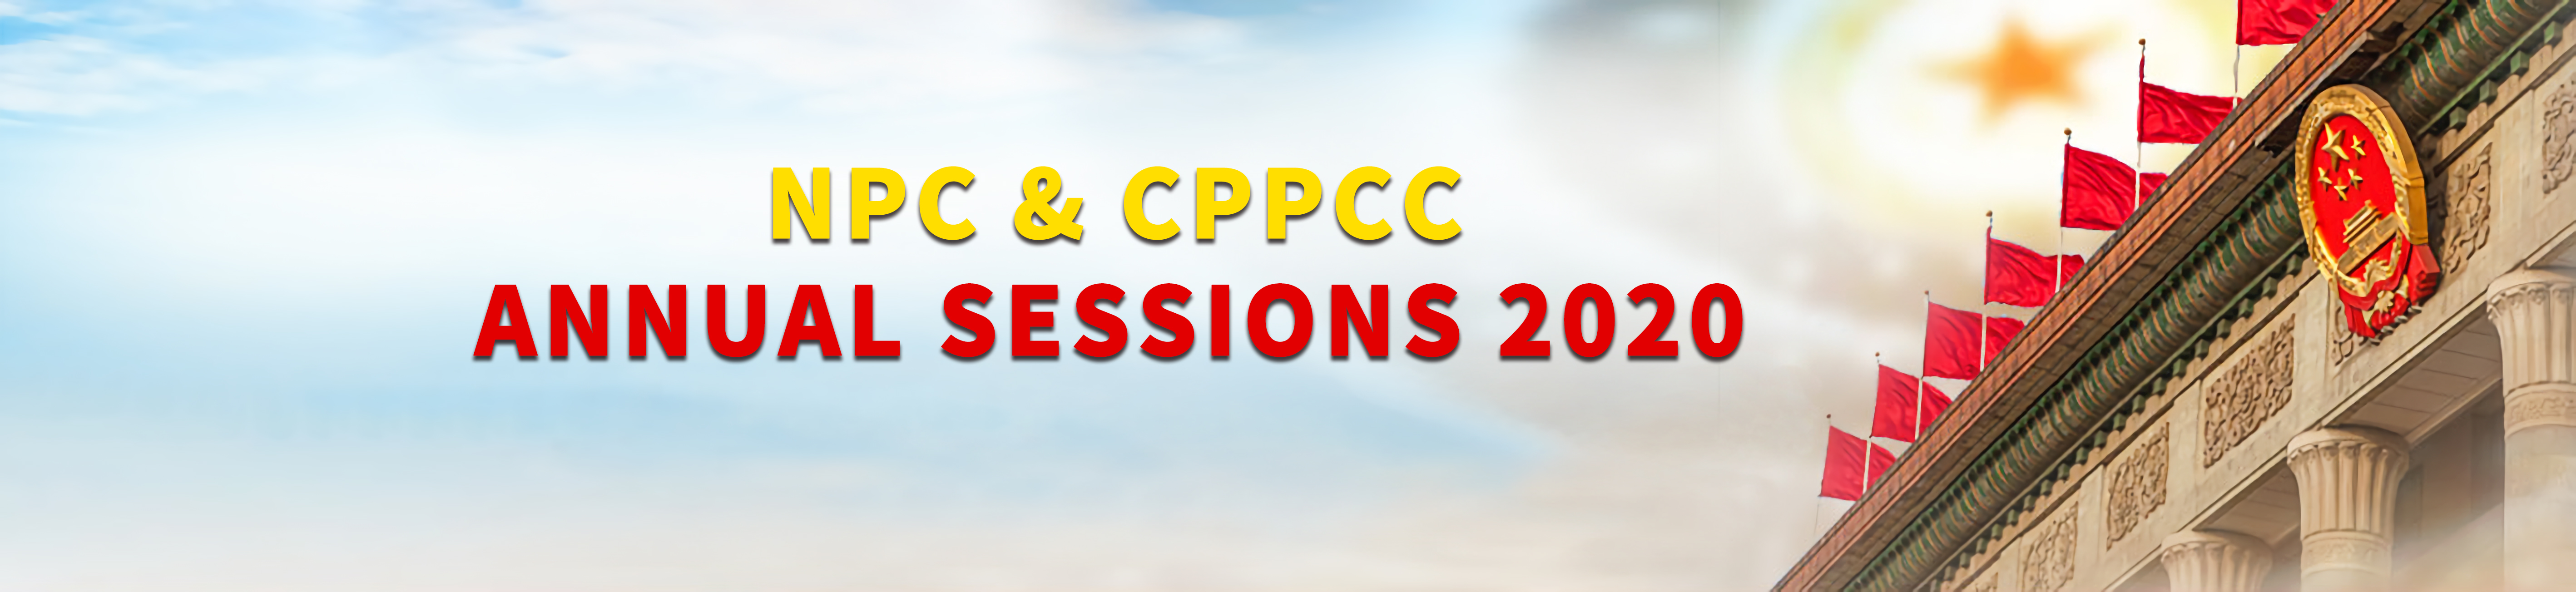 Two sessions banner 2020 a